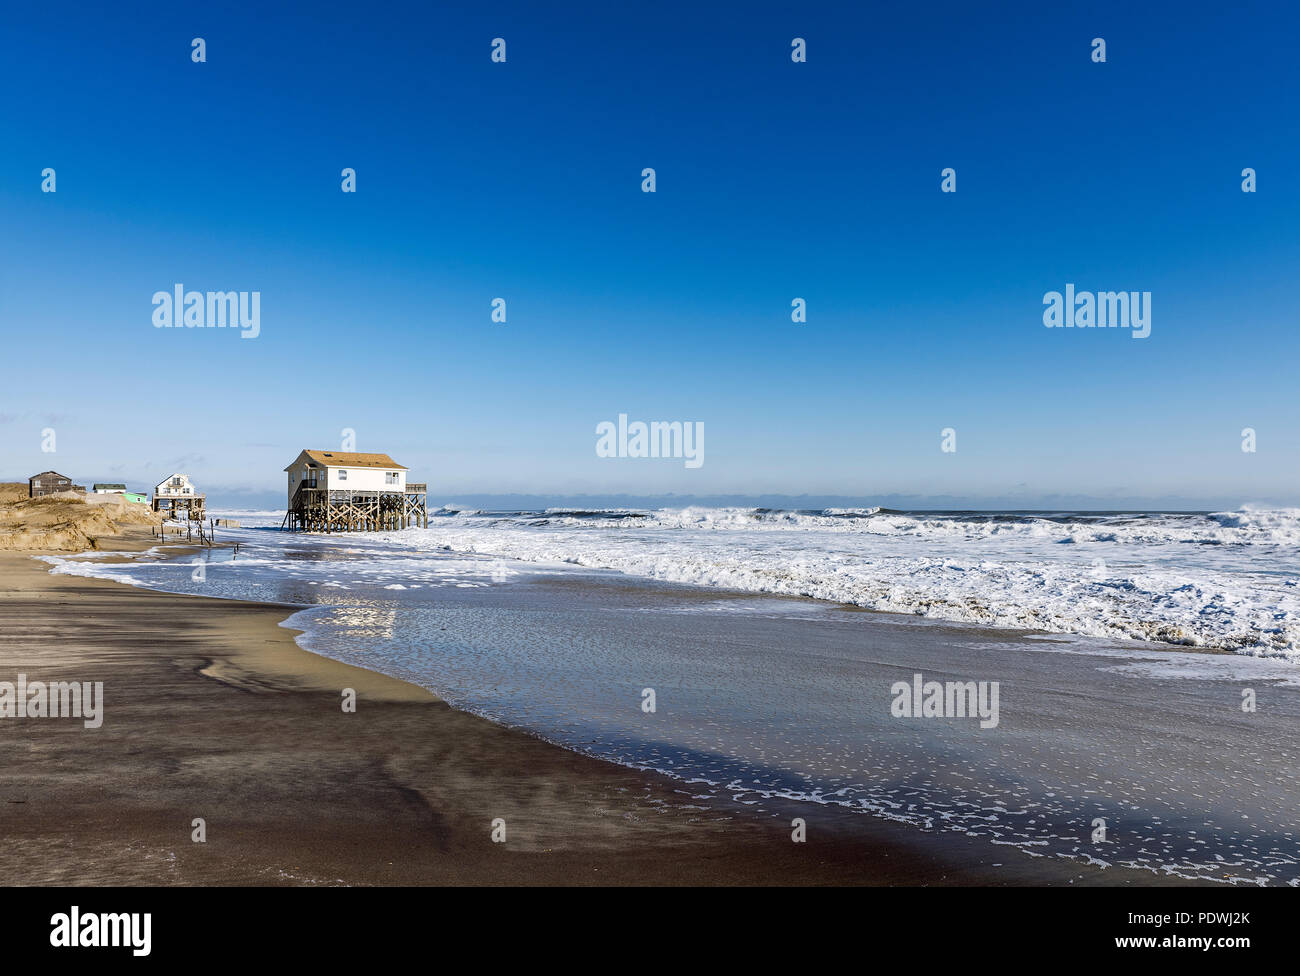 Beach house on stilts surrounded by high tide surf, Nags Head, Outer Banks, North Carolina, USA Stock Photo